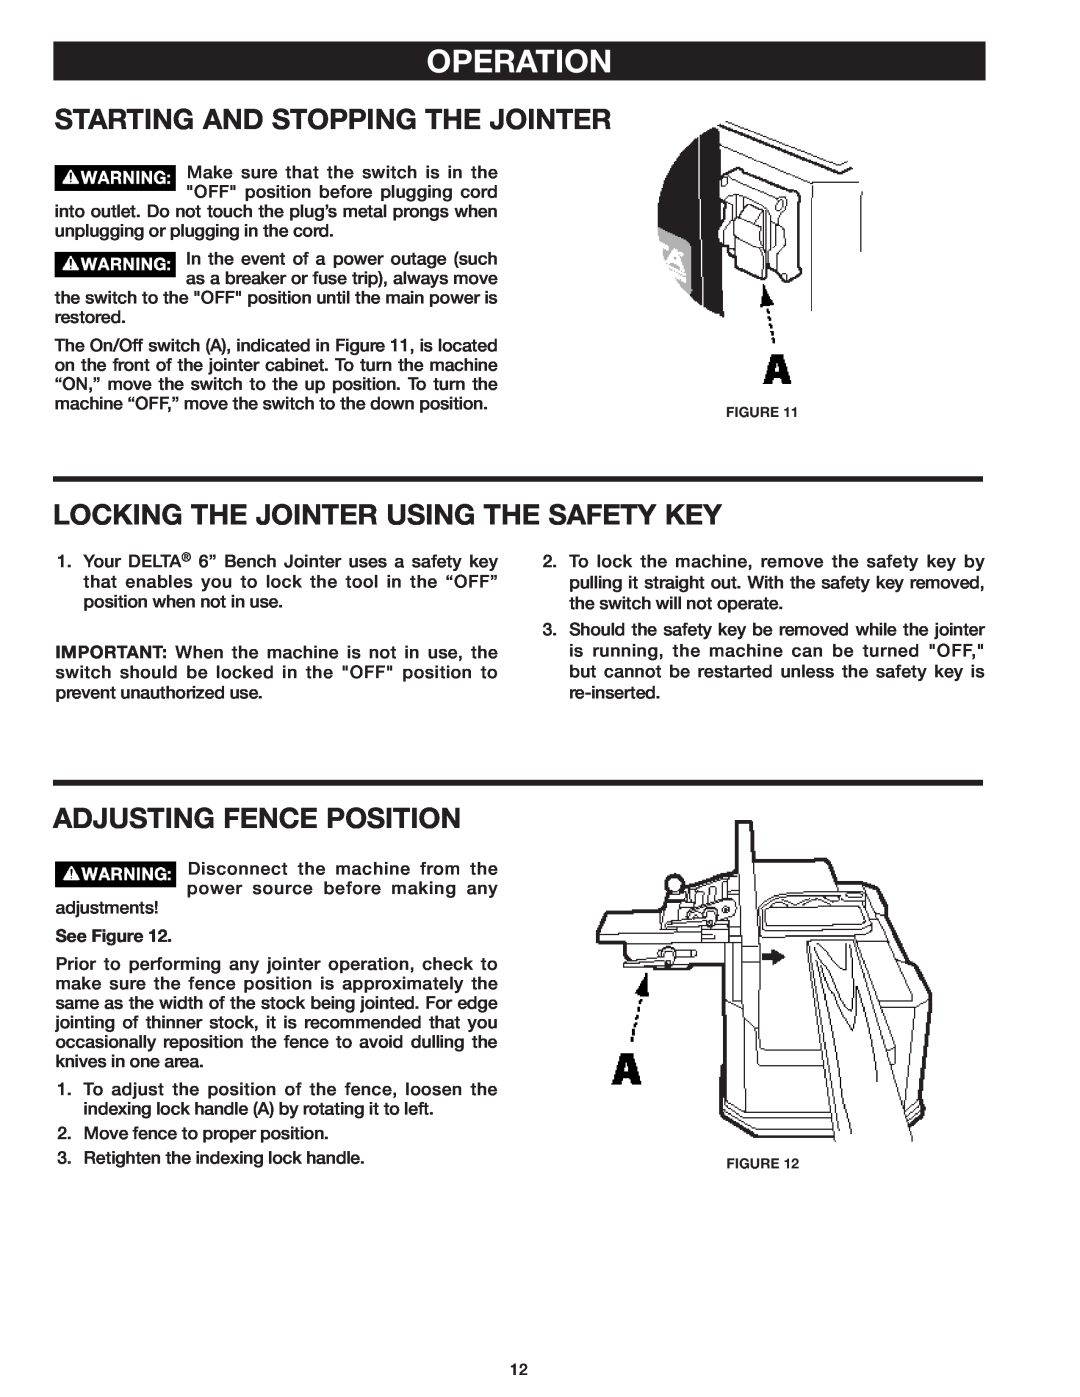 Delta 37-071 instruction manual Operation, Starting And Stopping The Jointer, Locking The Jointer Using The Safety Key 